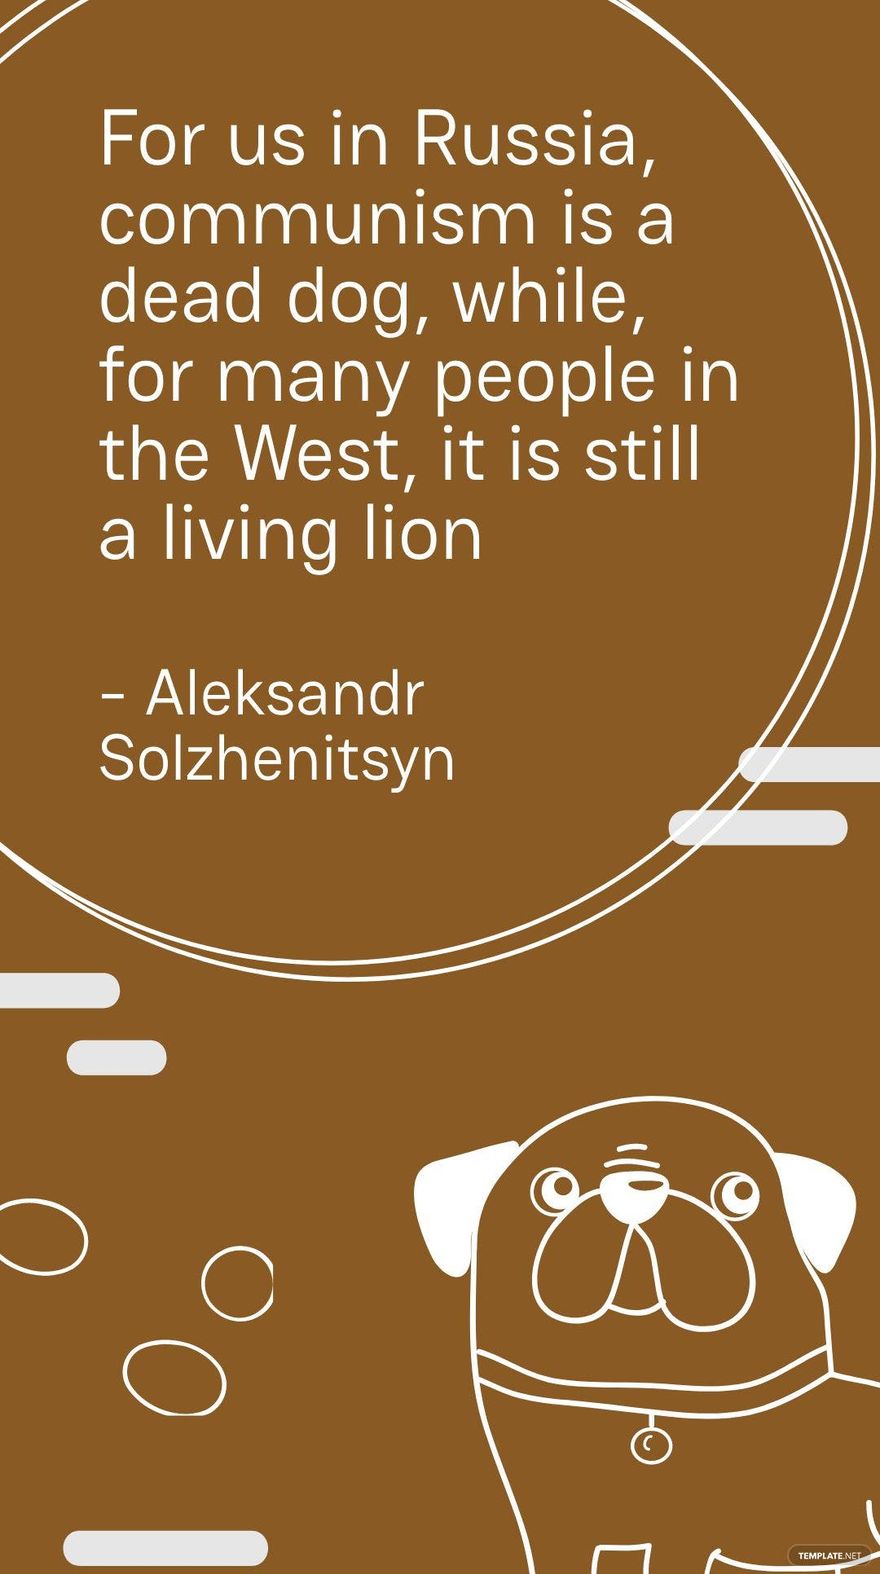 Aleksandr Solzhenitsyn - For us in Russia, communism is a dead dog, while, for many people in the West, it is still a living lion in JPG